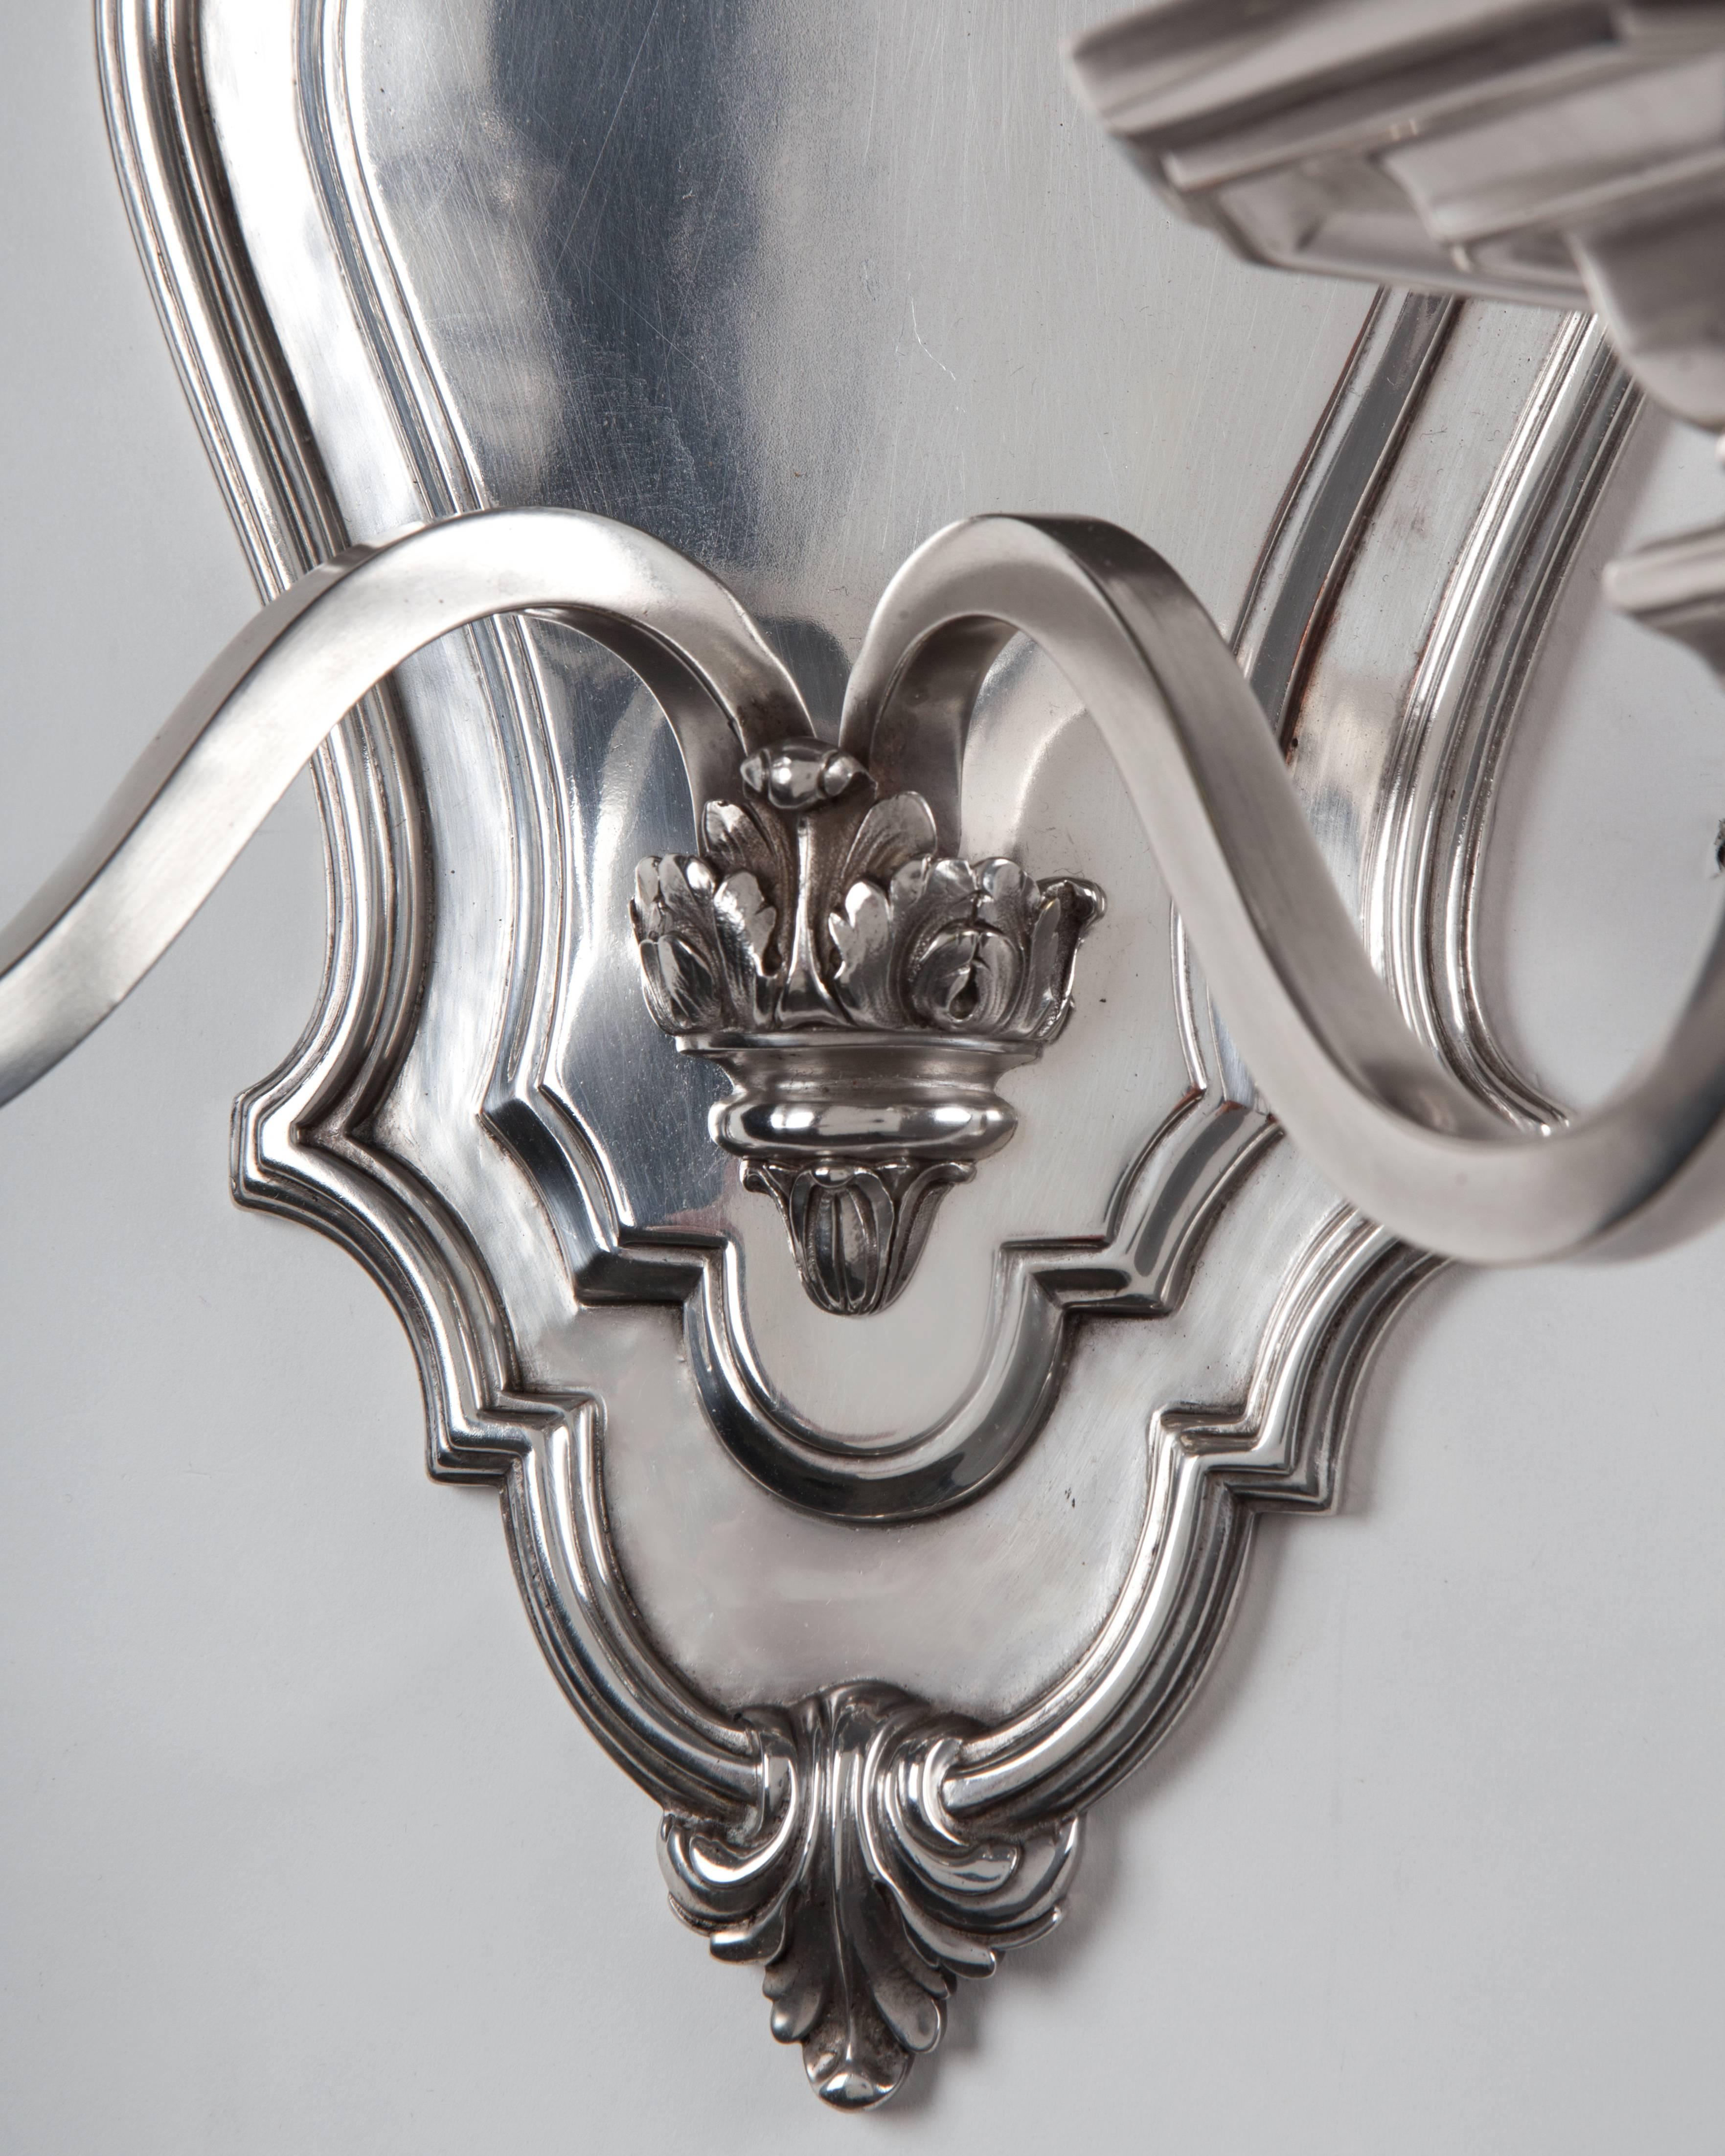 AIS2966.
A pair of silver plate double-light sconces with shallow, scalloped-edge backplates. Square-section S-curving arms spring from the backplate to support chamfered square bobeches and faceted candle cups. Signed by the New York maker E. F.